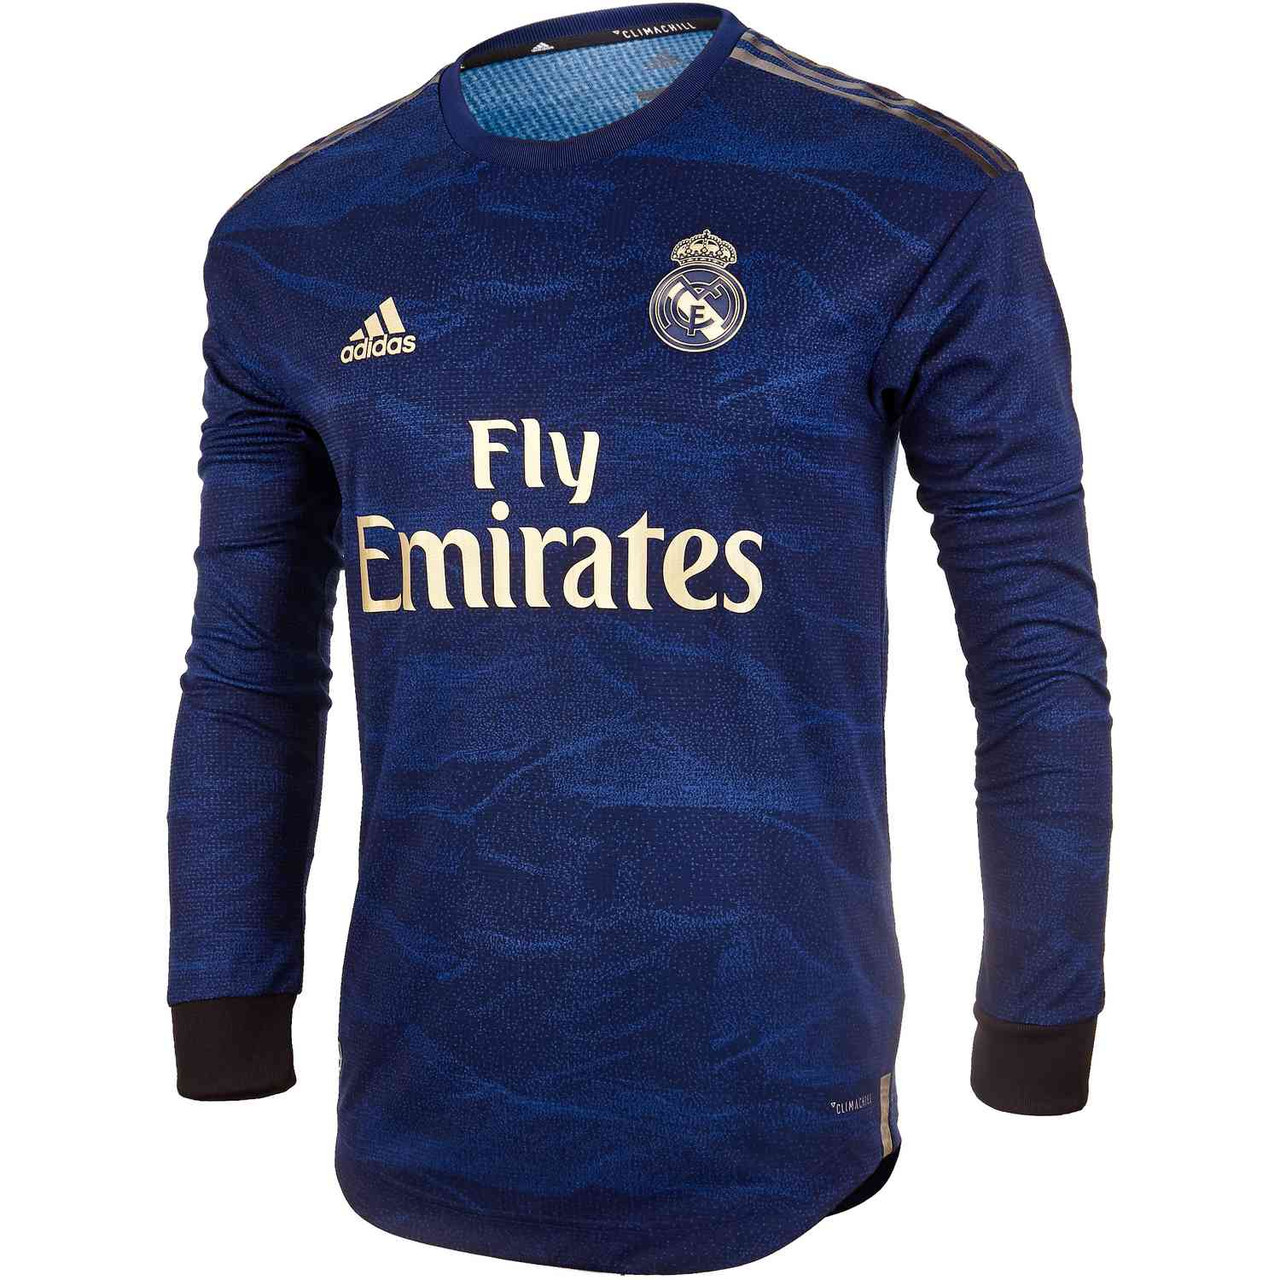 ADIDAS REAL MADRID 2020 AWAY AUTHENTIC LS JERSEY